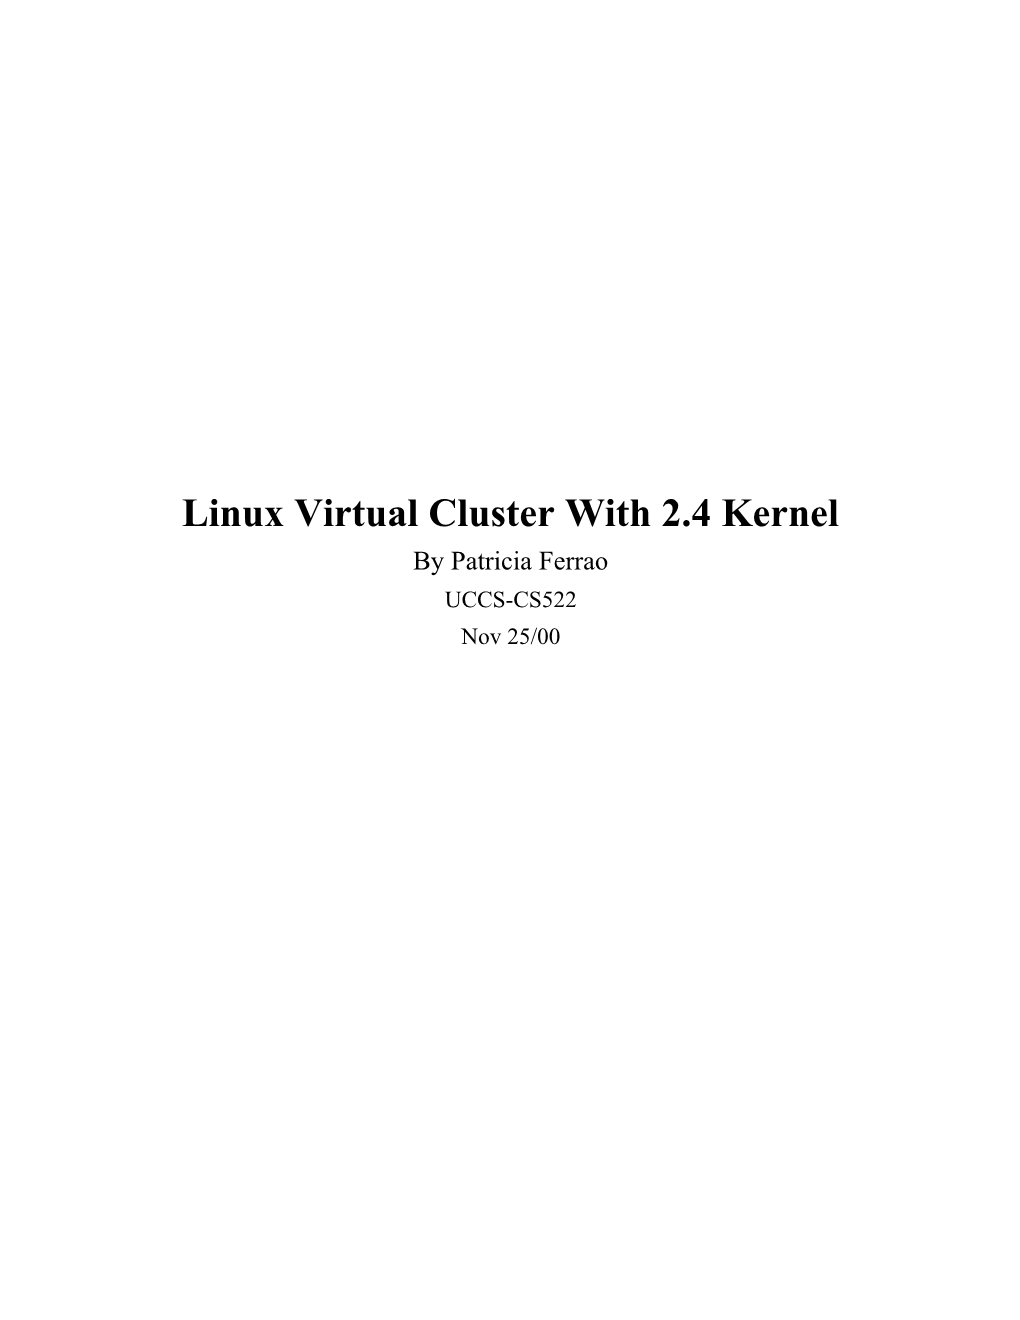 Linux Virtual Cluster with 2